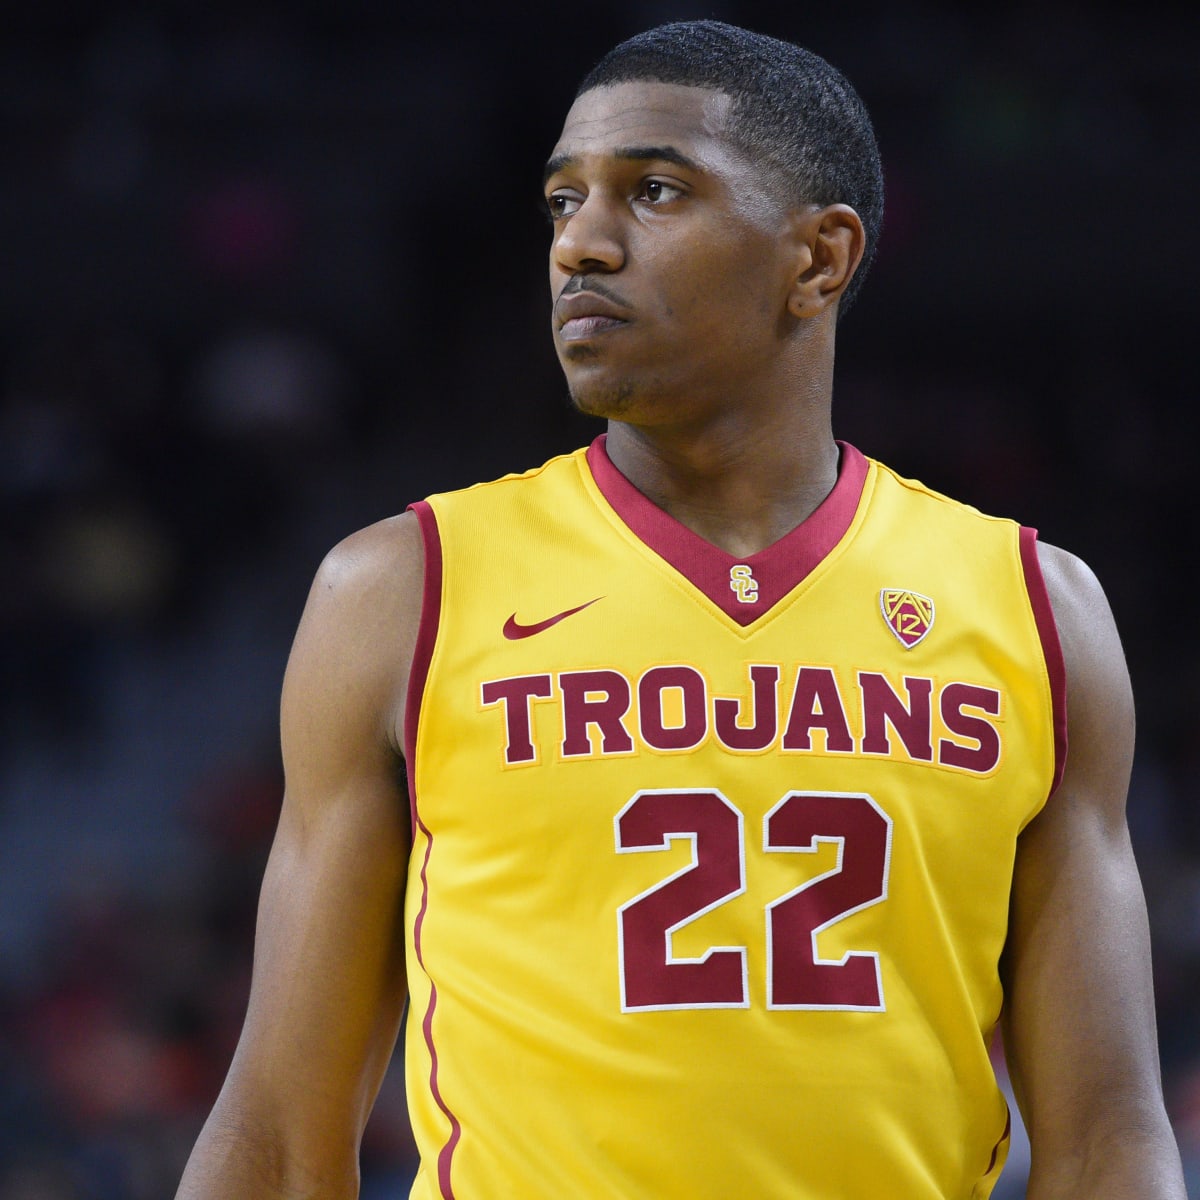 DraftExpress - De'Anthony Melton DraftExpress Profile: Stats, Comparisons,  and Outlook